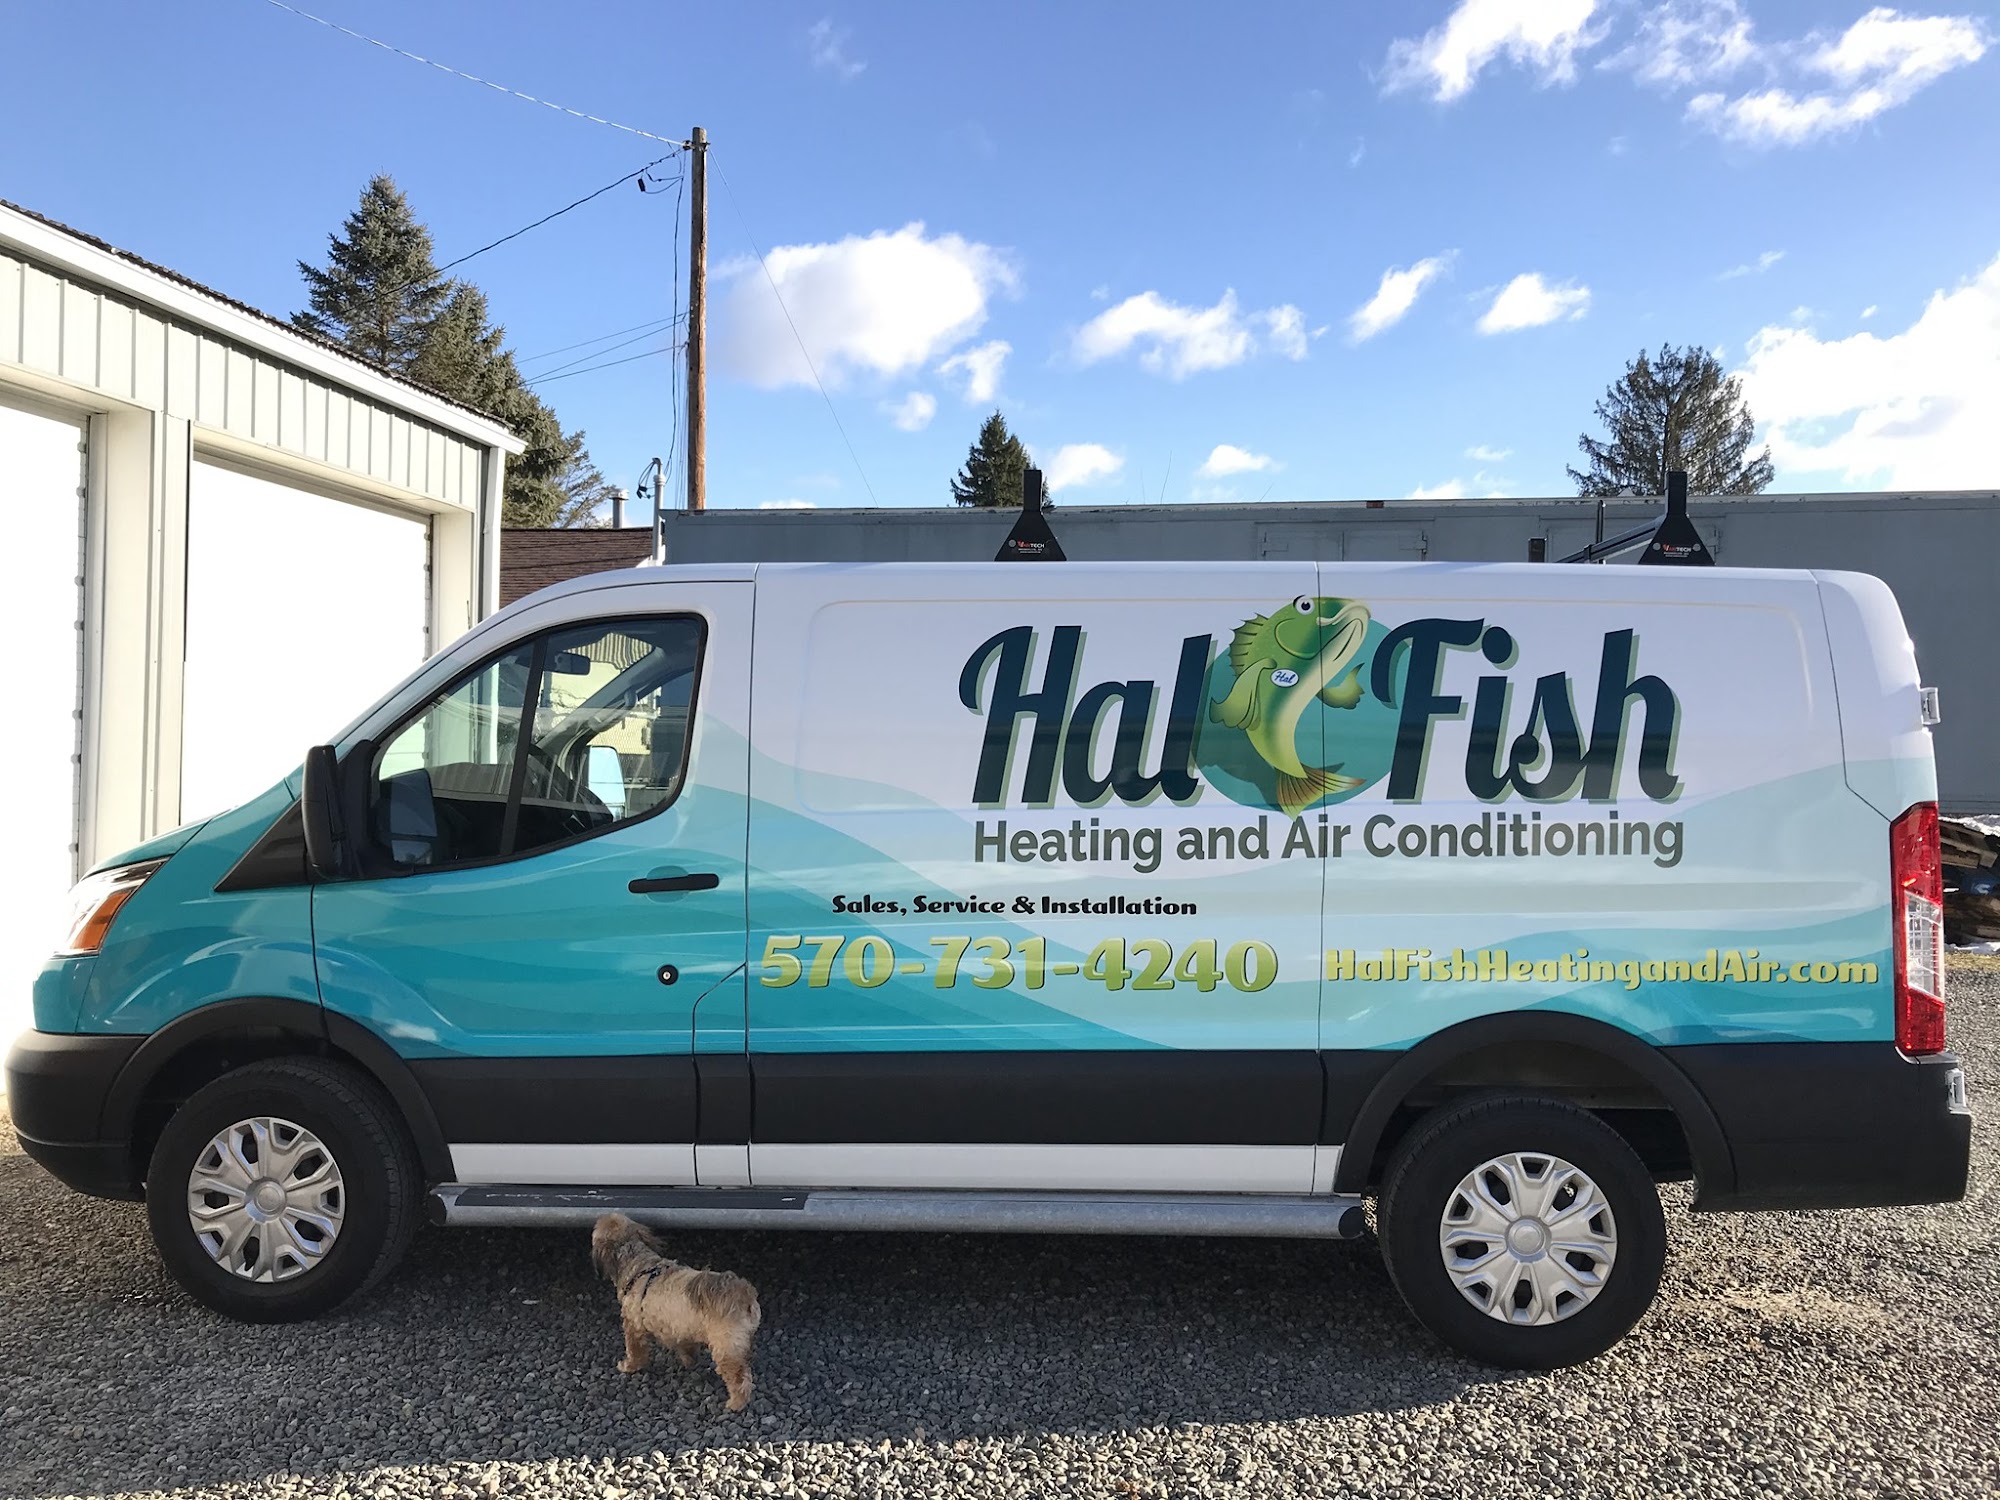 Hal Fish Heating & Air Conditioning